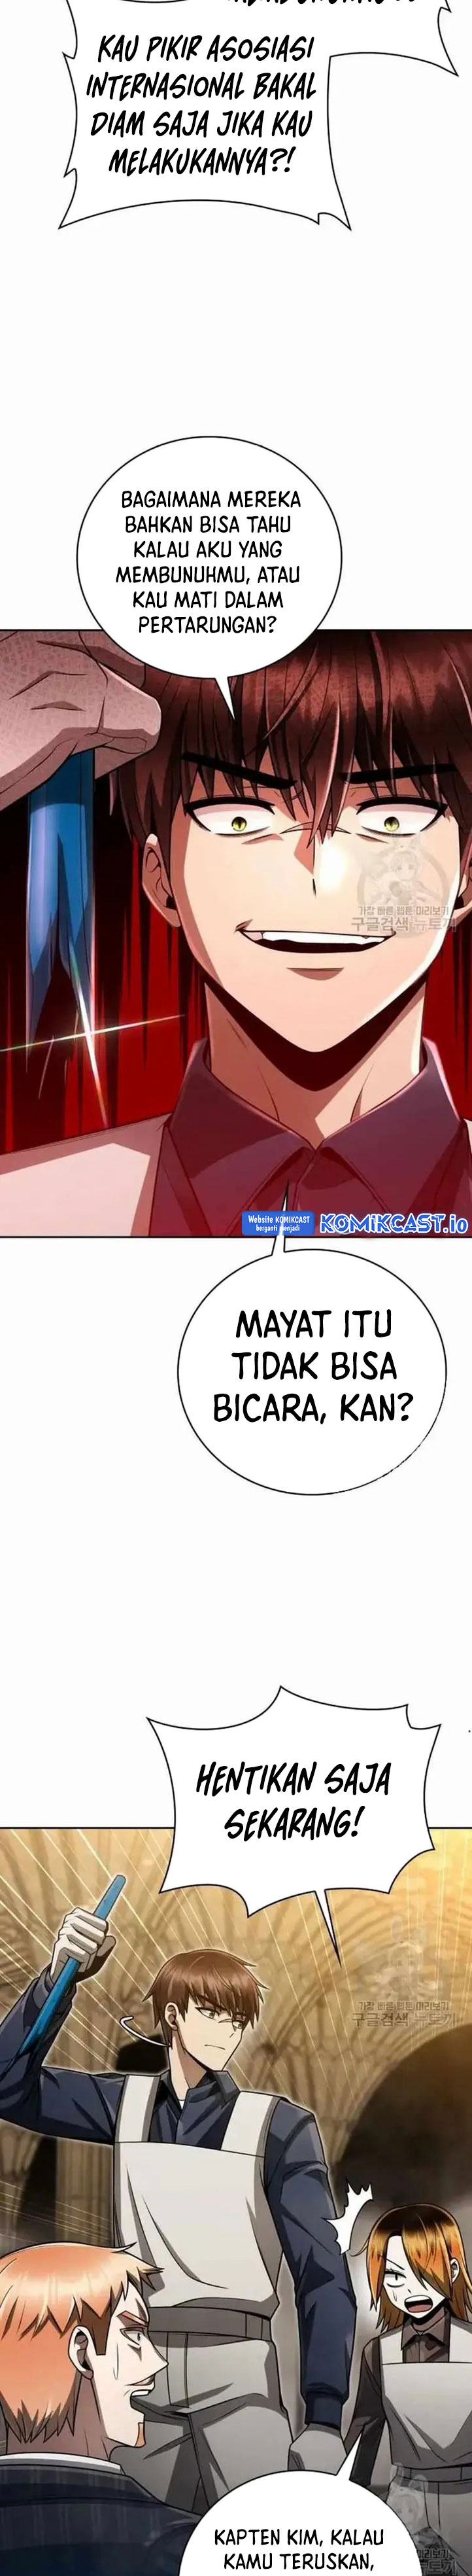 Dilarang COPAS - situs resmi www.mangacanblog.com - Komik clever cleaning life of the returned genius hunter 037 - chapter 37 38 Indonesia clever cleaning life of the returned genius hunter 037 - chapter 37 Terbaru 19|Baca Manga Komik Indonesia|Mangacan